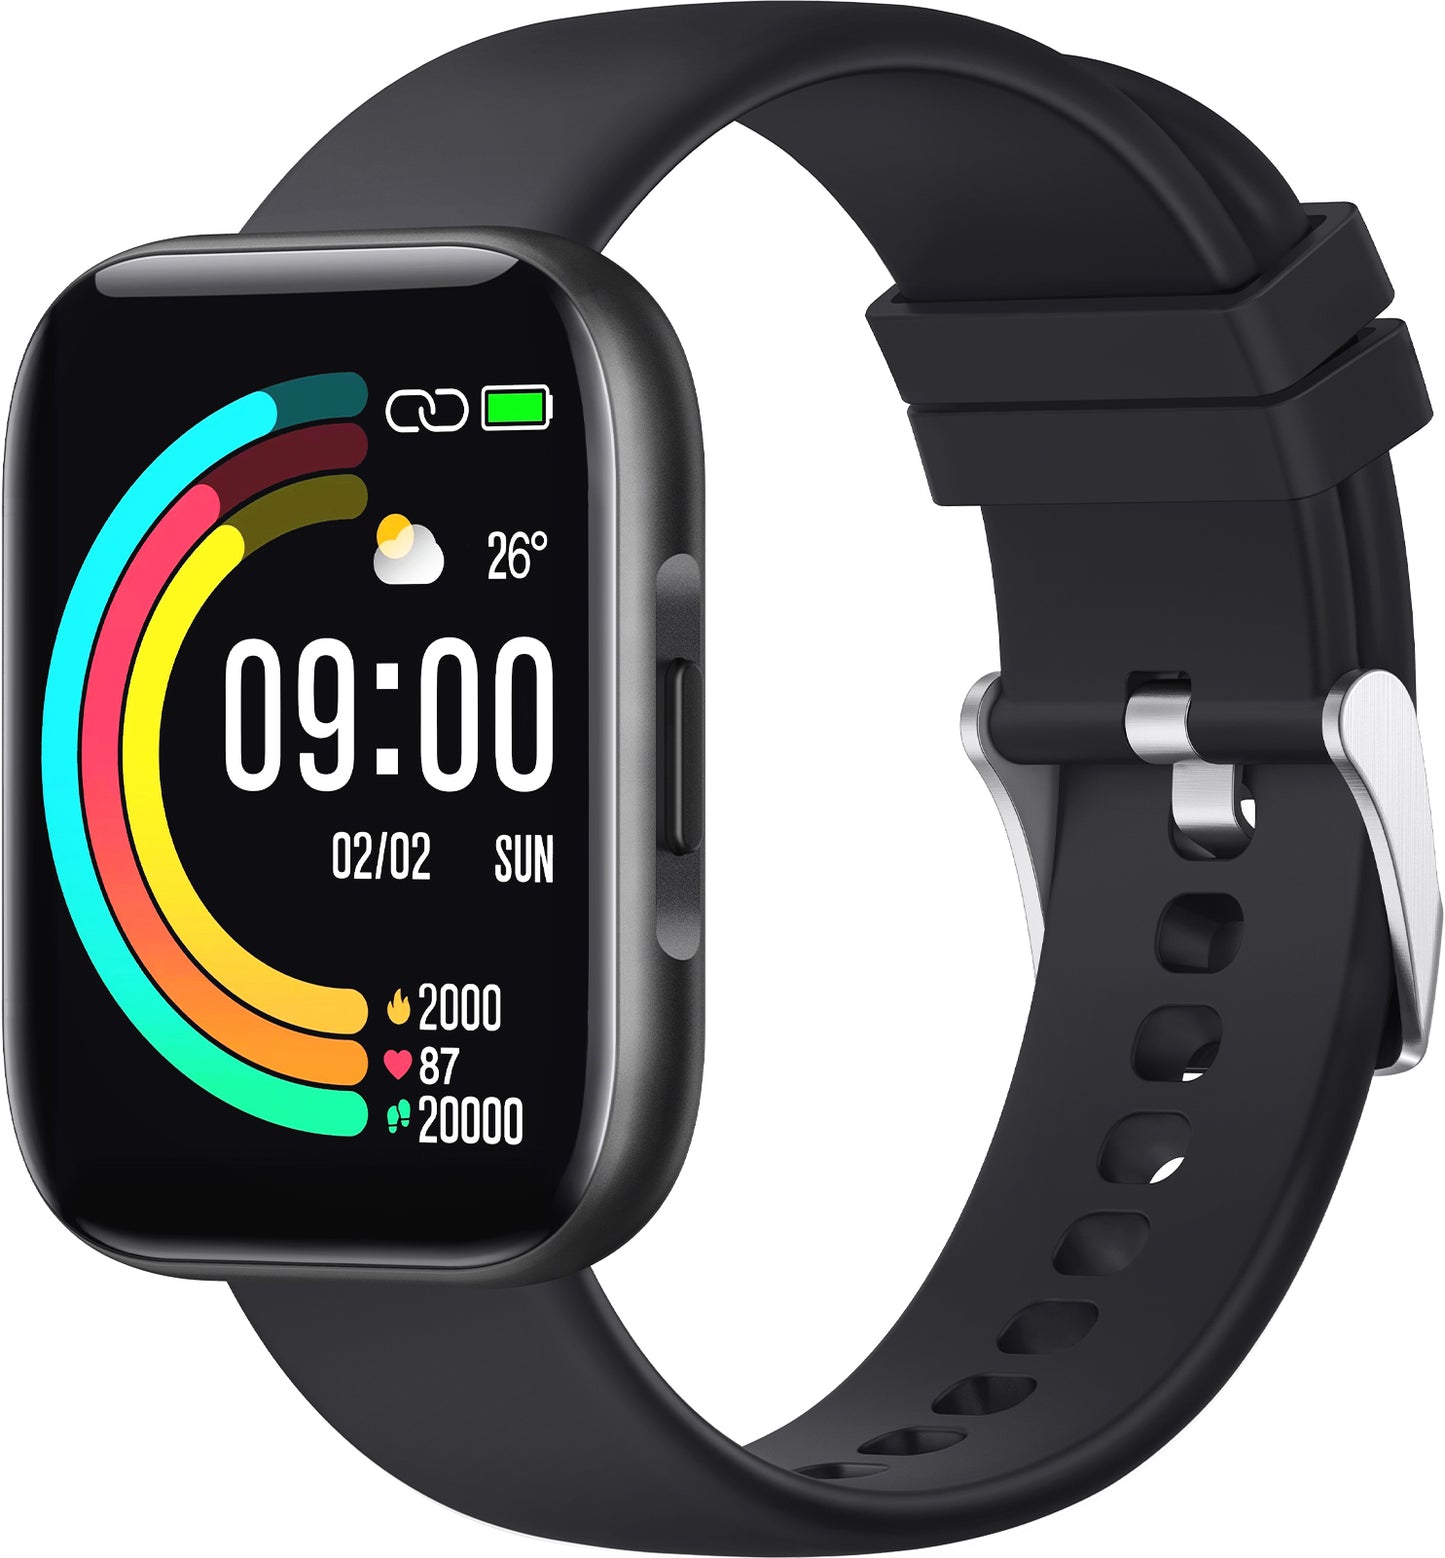 ANCwear 207-1.78" Touch Screen/24H Heart Rate& Sleep Monitor/IP68 Waterproof /24 Sports Modes/Compatible Andriod iOS